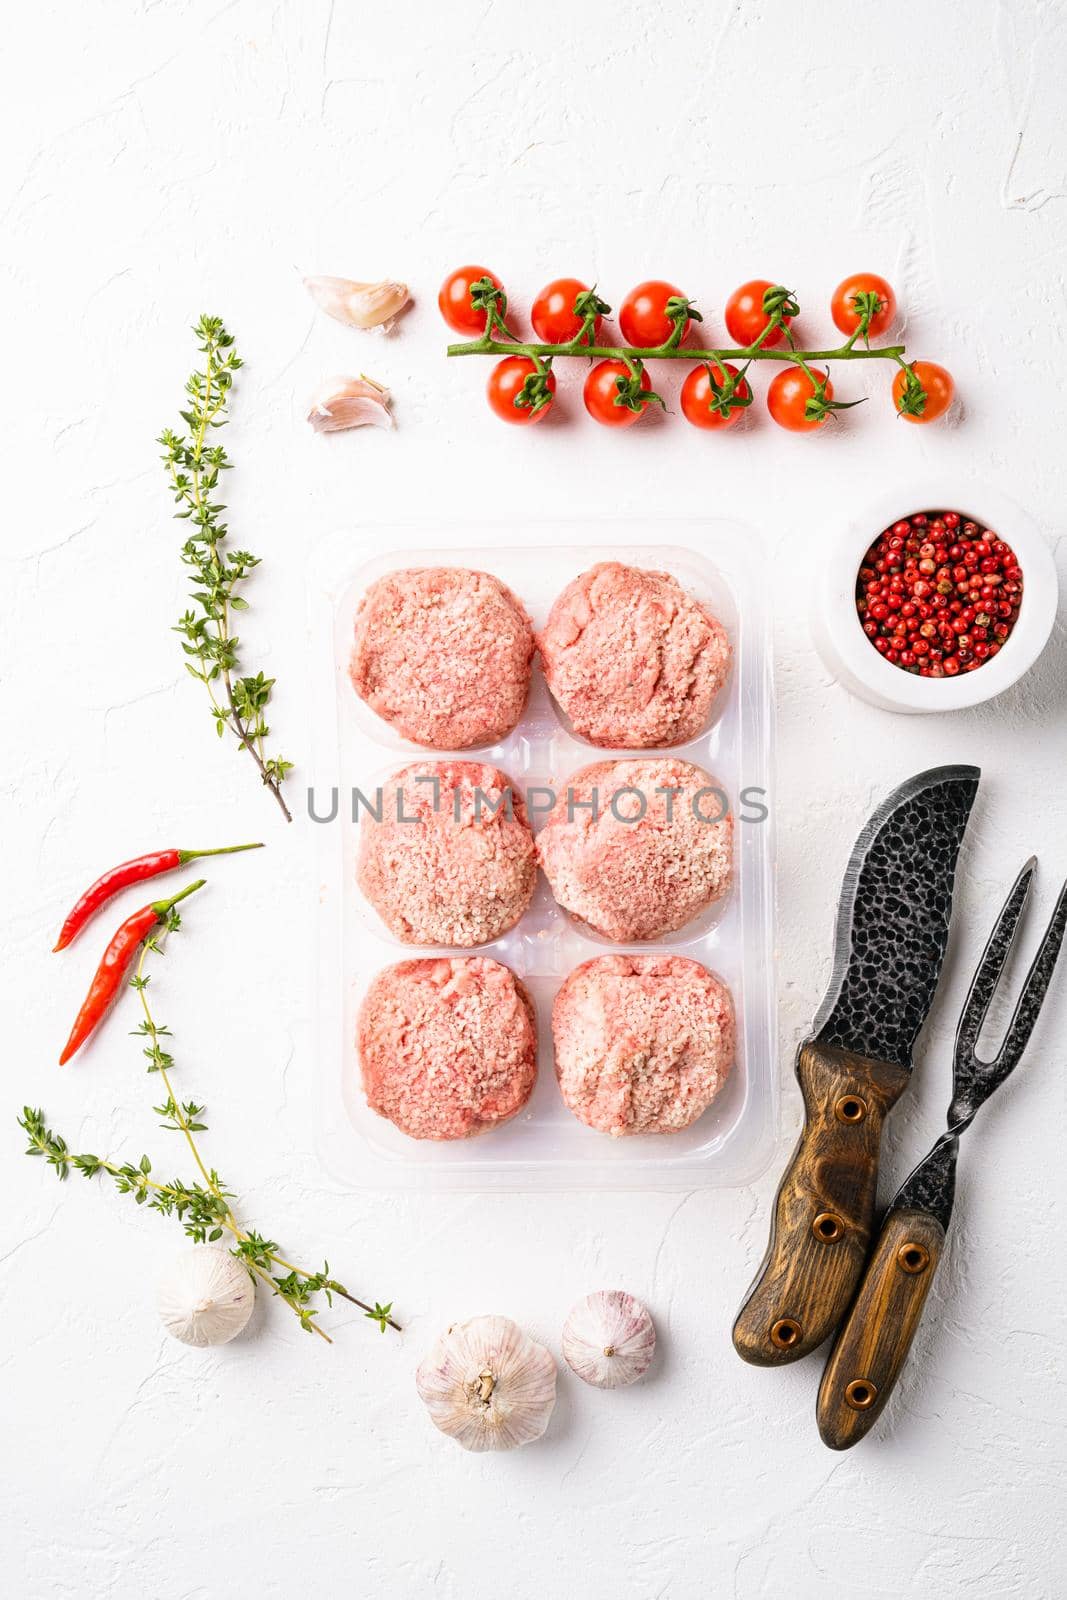 Semi finished products, meatballs, meat patties in plastic pack, on white stone table background, top view flat lay by Ilianesolenyi